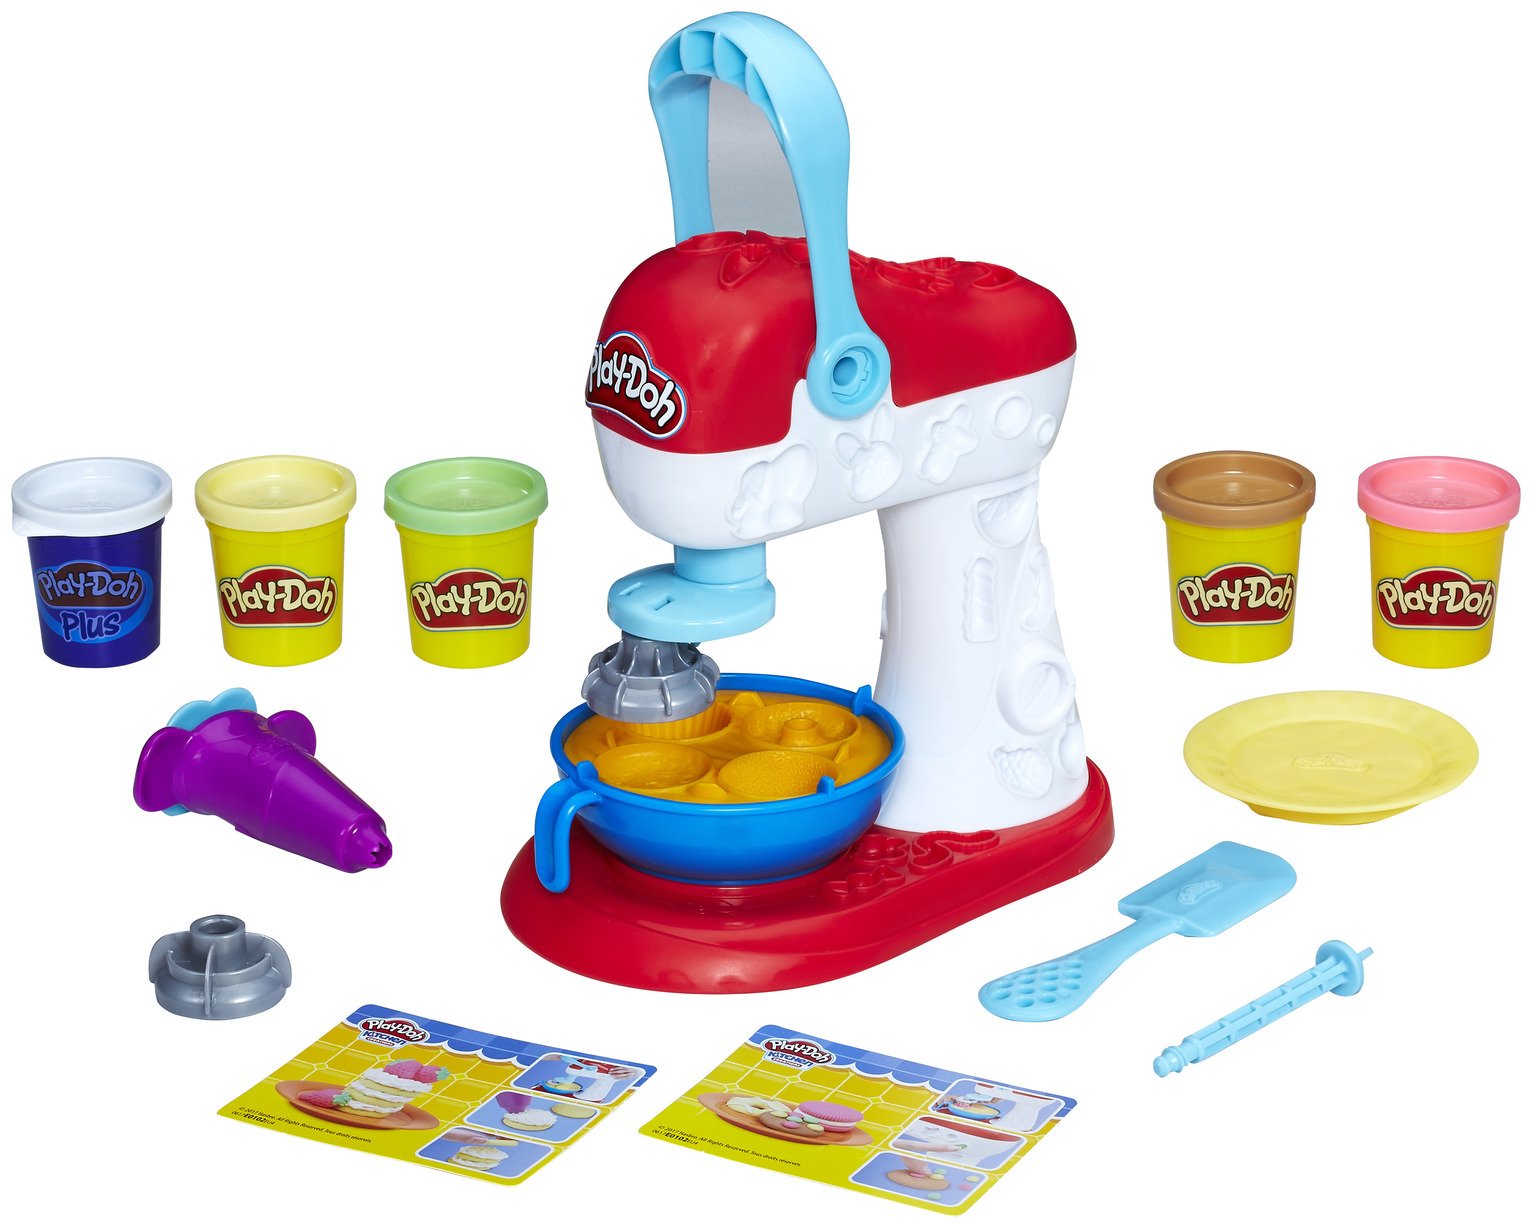 play doh kitchen creations